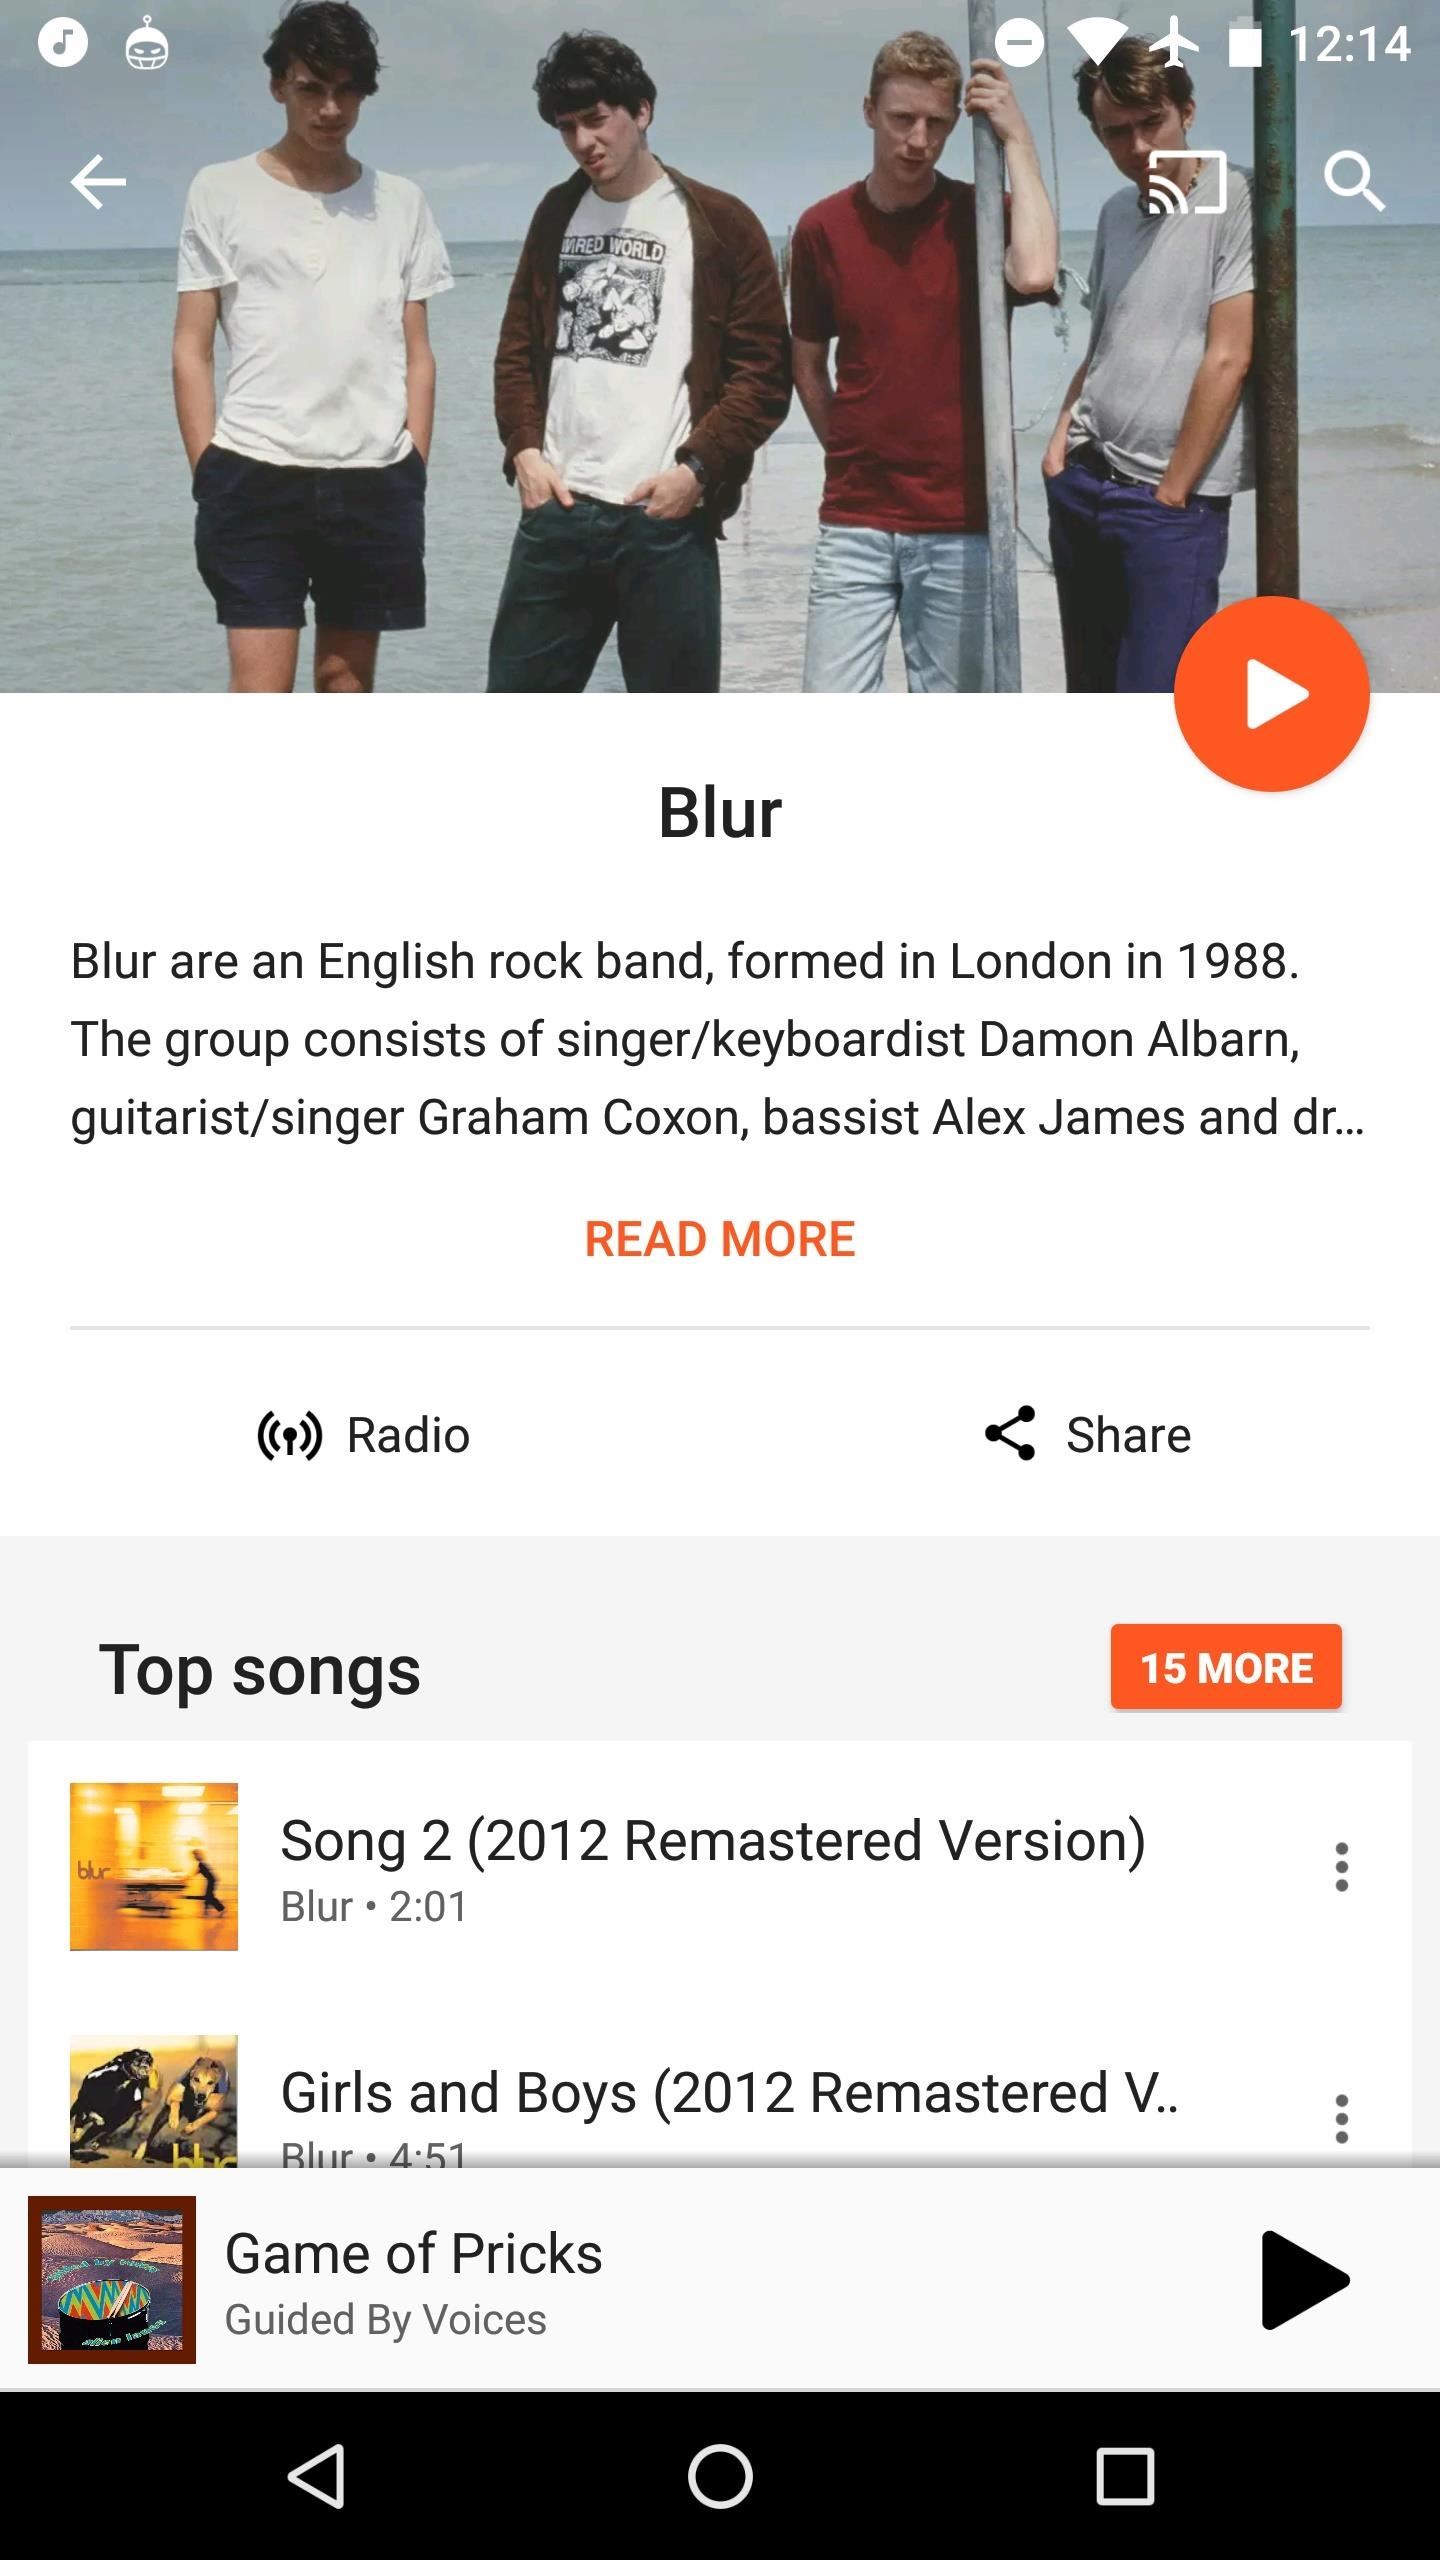 Google Play Music 101: Finding & Adding New Music to Your Library